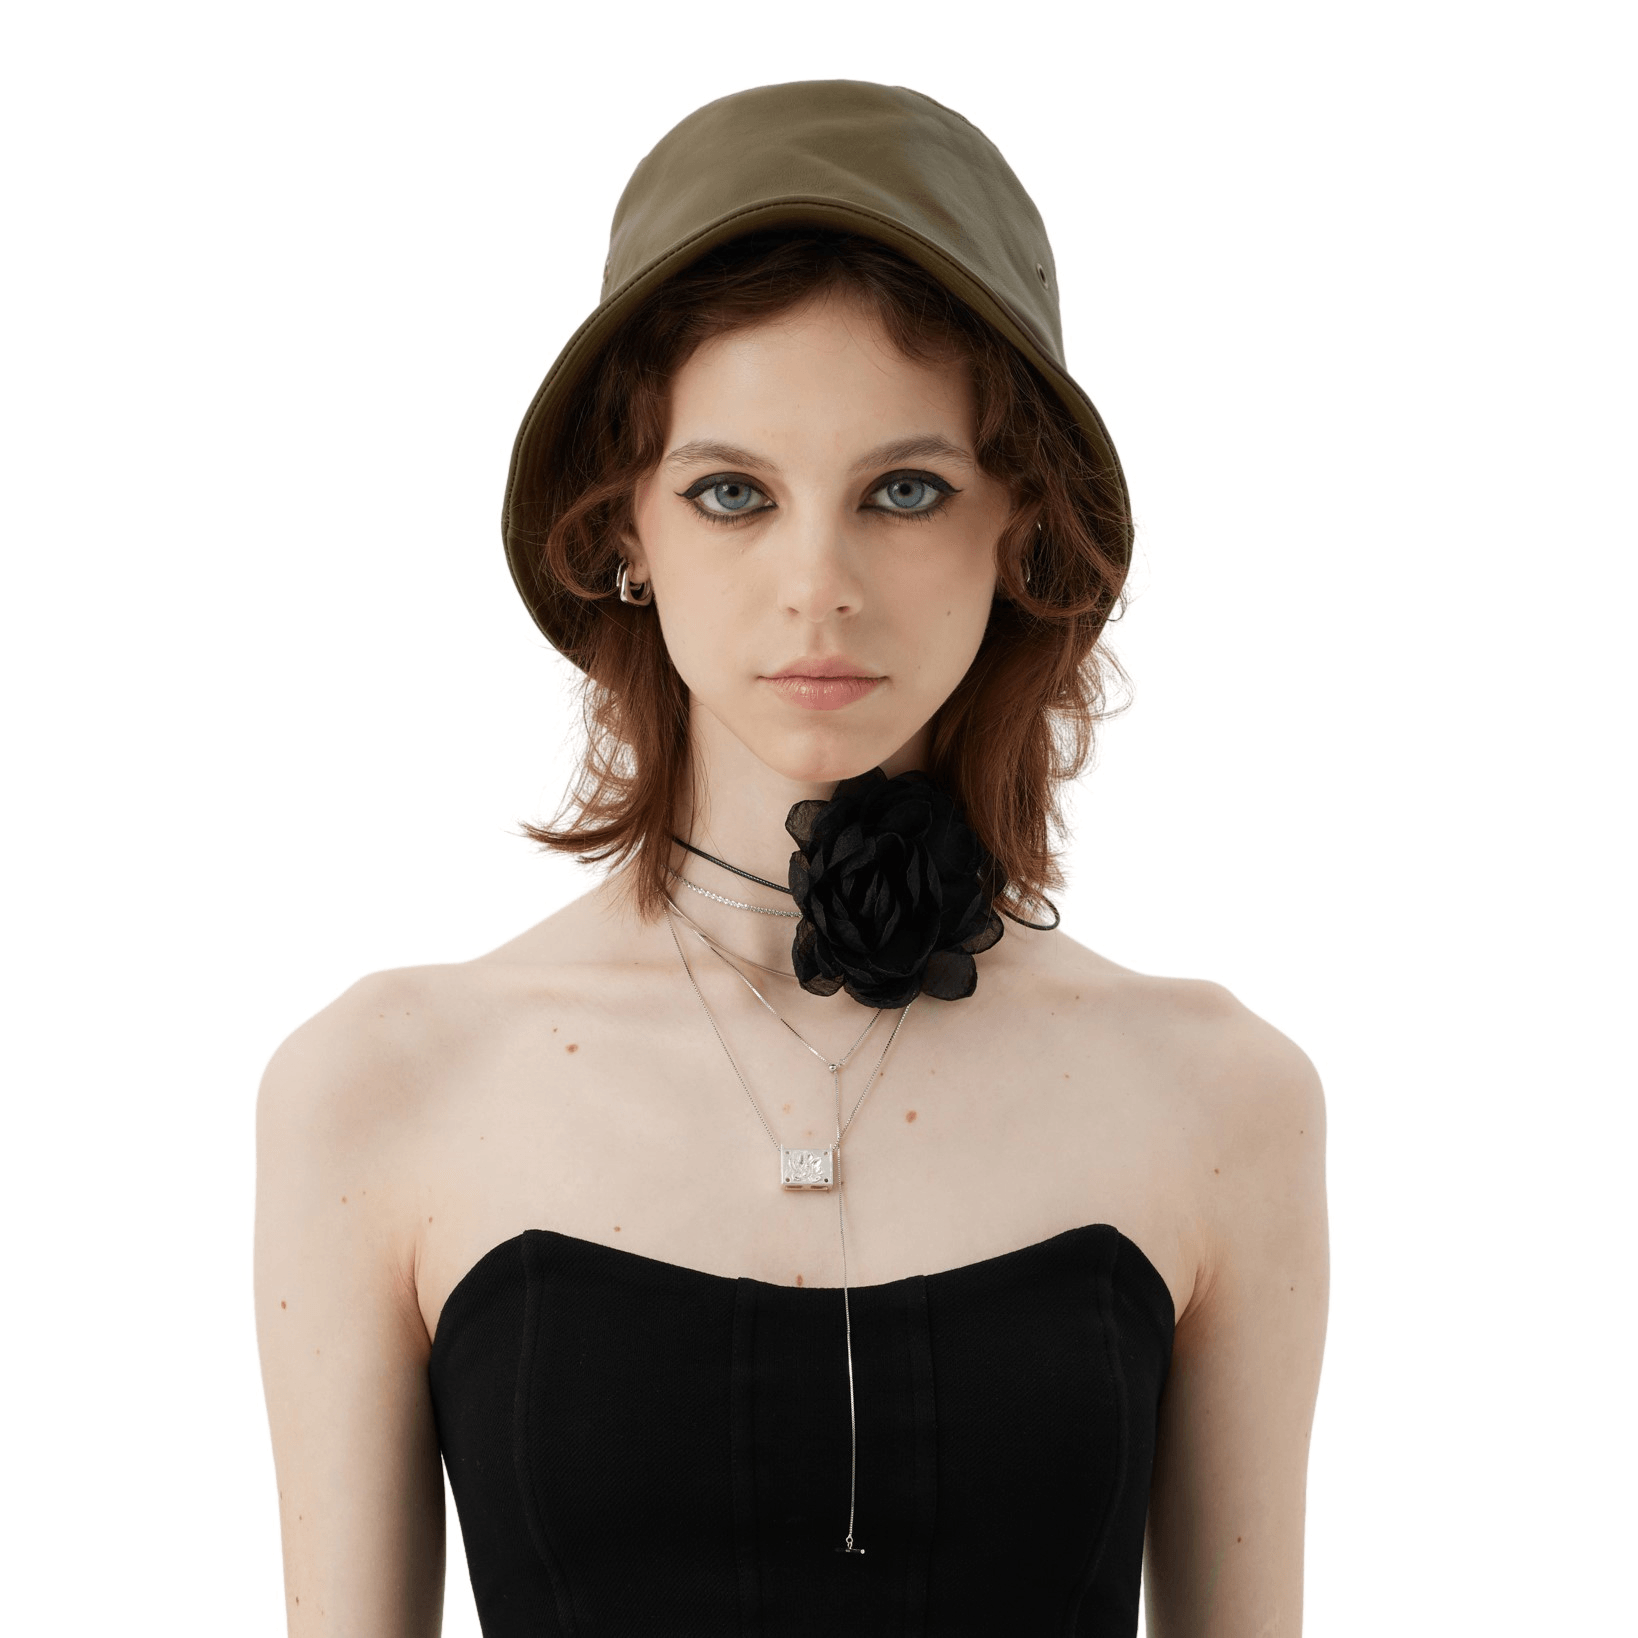 Olive Green Leather Bucket Hat - Uniqvibe